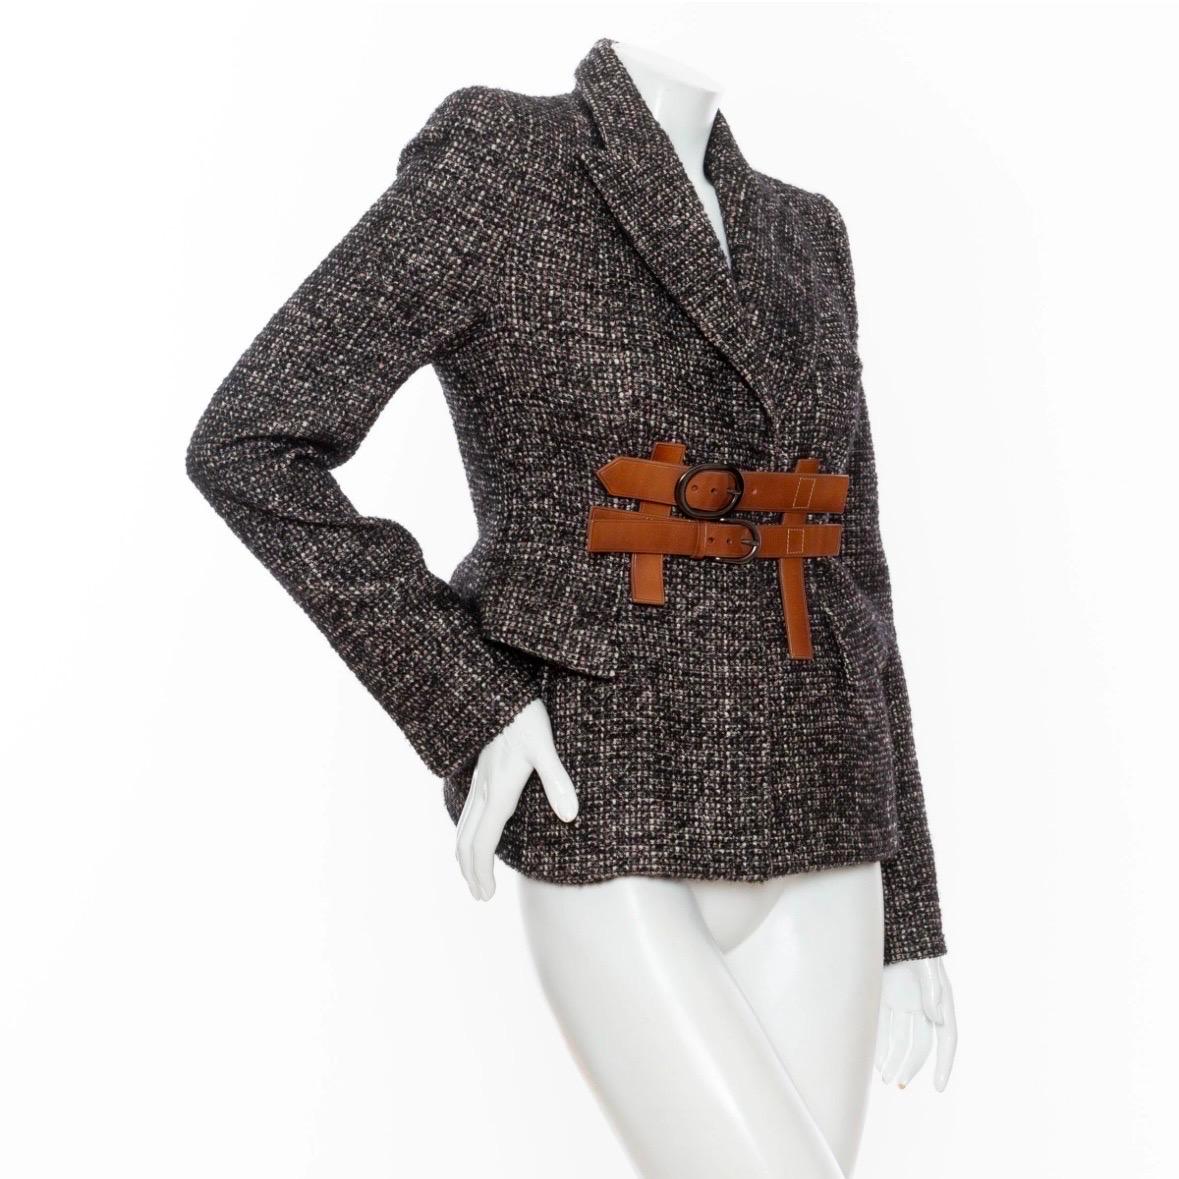 Tom Ford Black and Brown Tweed Belted Jacket

Black/Brown/White
Brown leather belted front
Antiqued silver-tone buckles
Pointed collar; optional high neck belted collar
Front flap pockets
Concealed buttons on cuffs
Inner pocket
Fitted silhouette